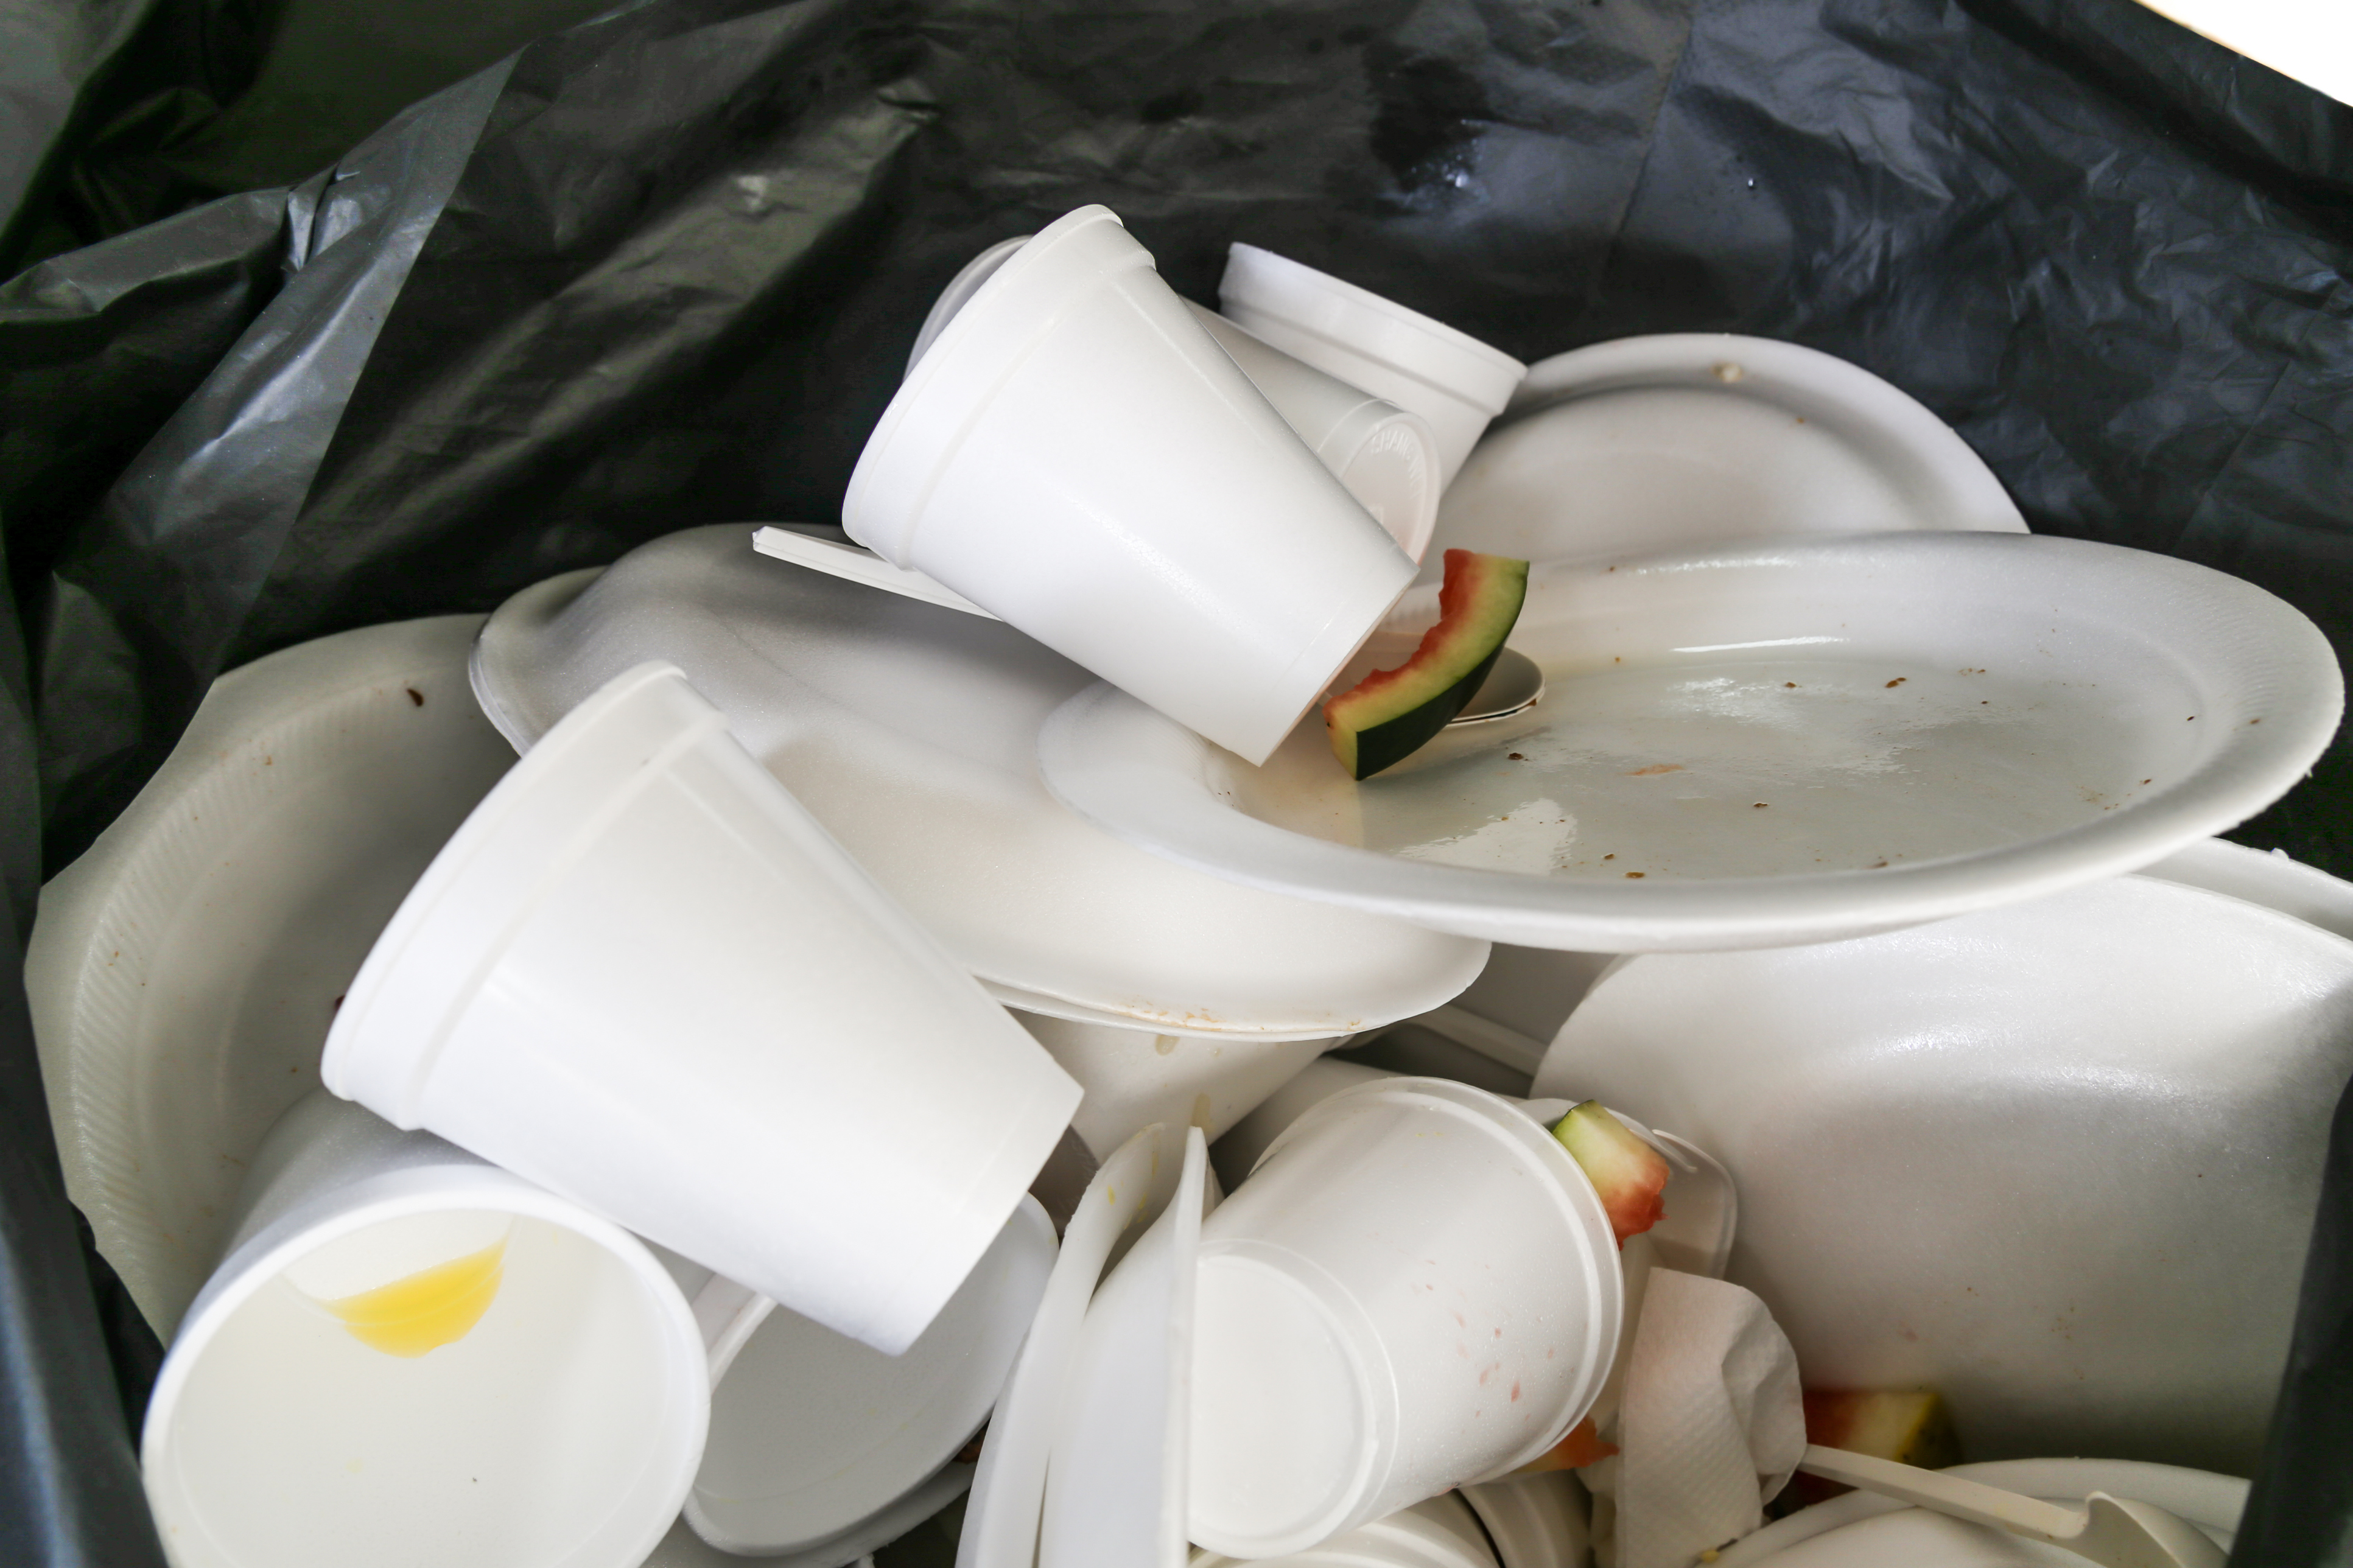 Styrofoam is polluting our environment. Let's #BanTheFoam